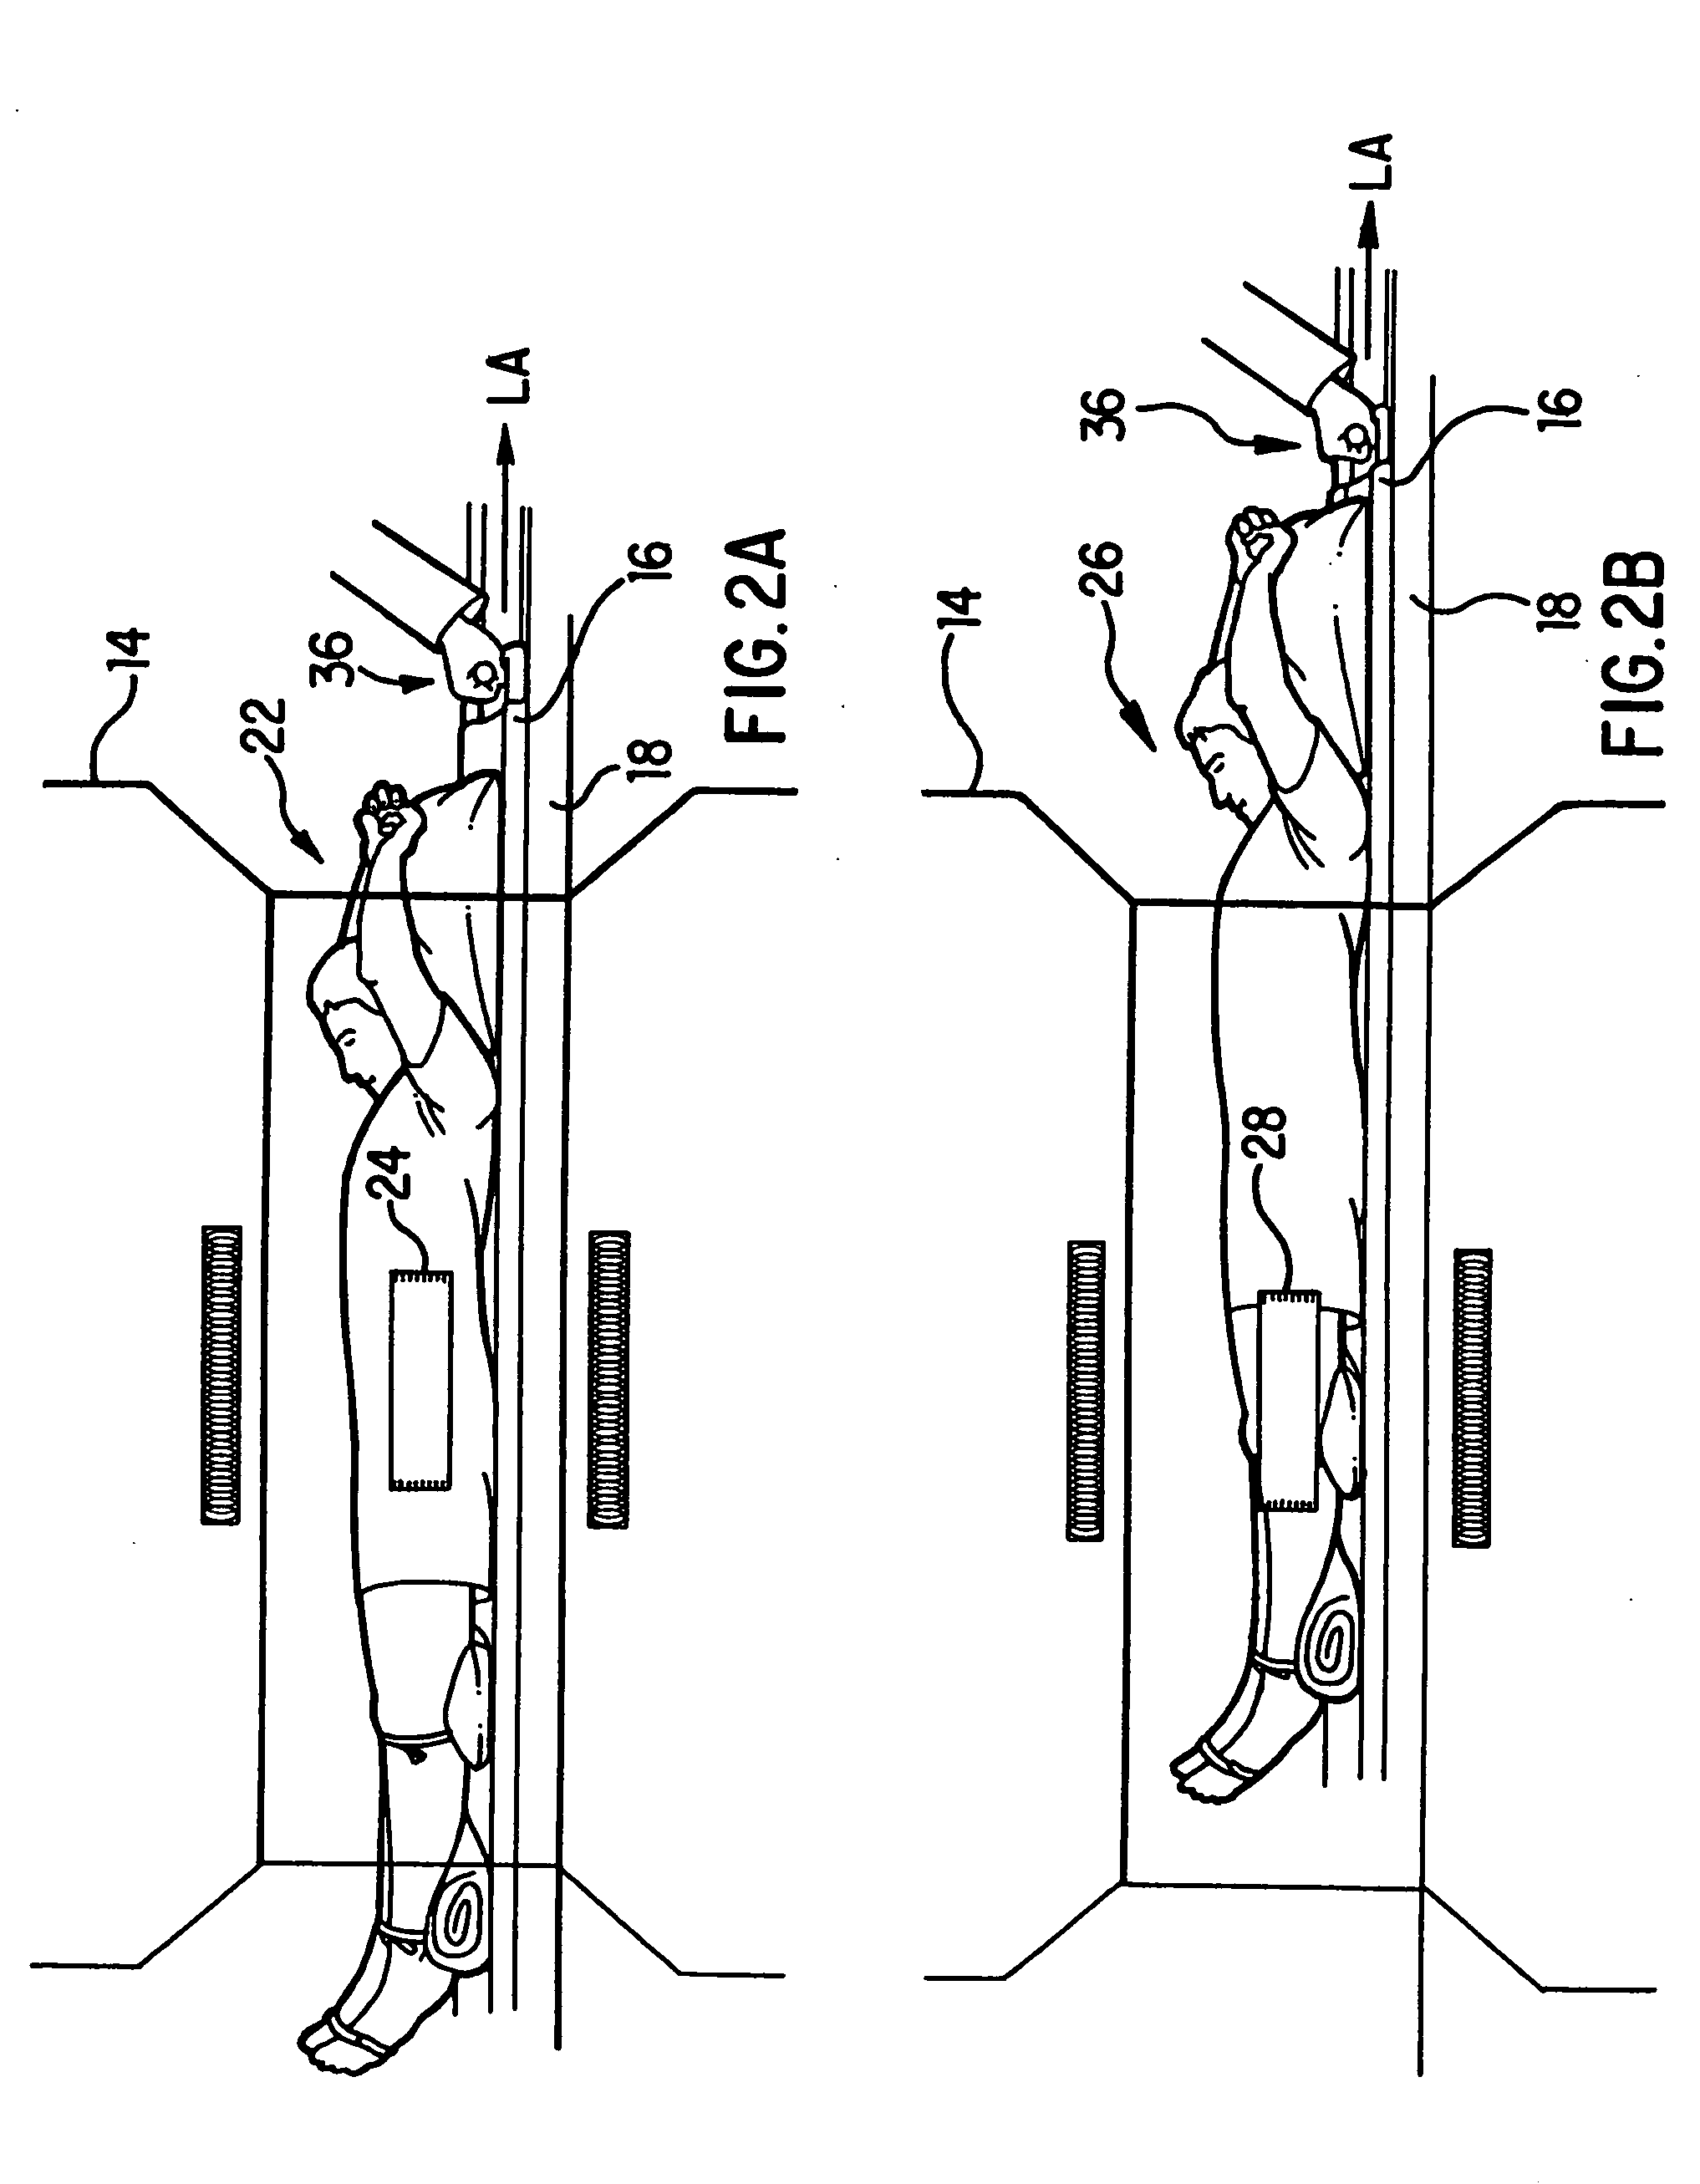 Method and apparatus for magnetic resonance arteriography using contrast agents